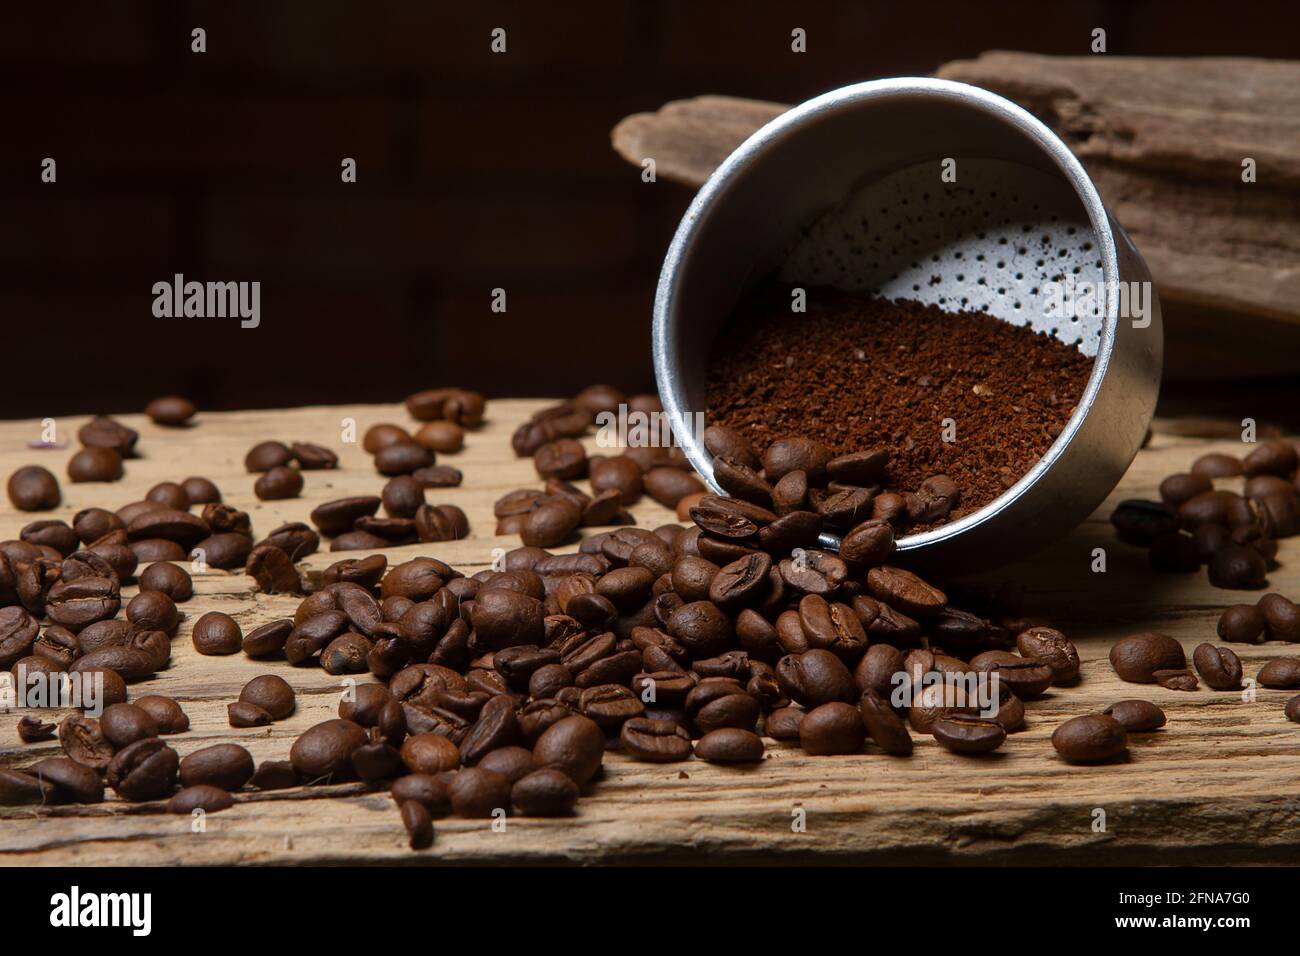 https://c8.alamy.com/comp/2FNA7G0/mocha-coffee-filter-with-ground-coffee-and-some-scattered-coffee-beans-2FNA7G0.jpg